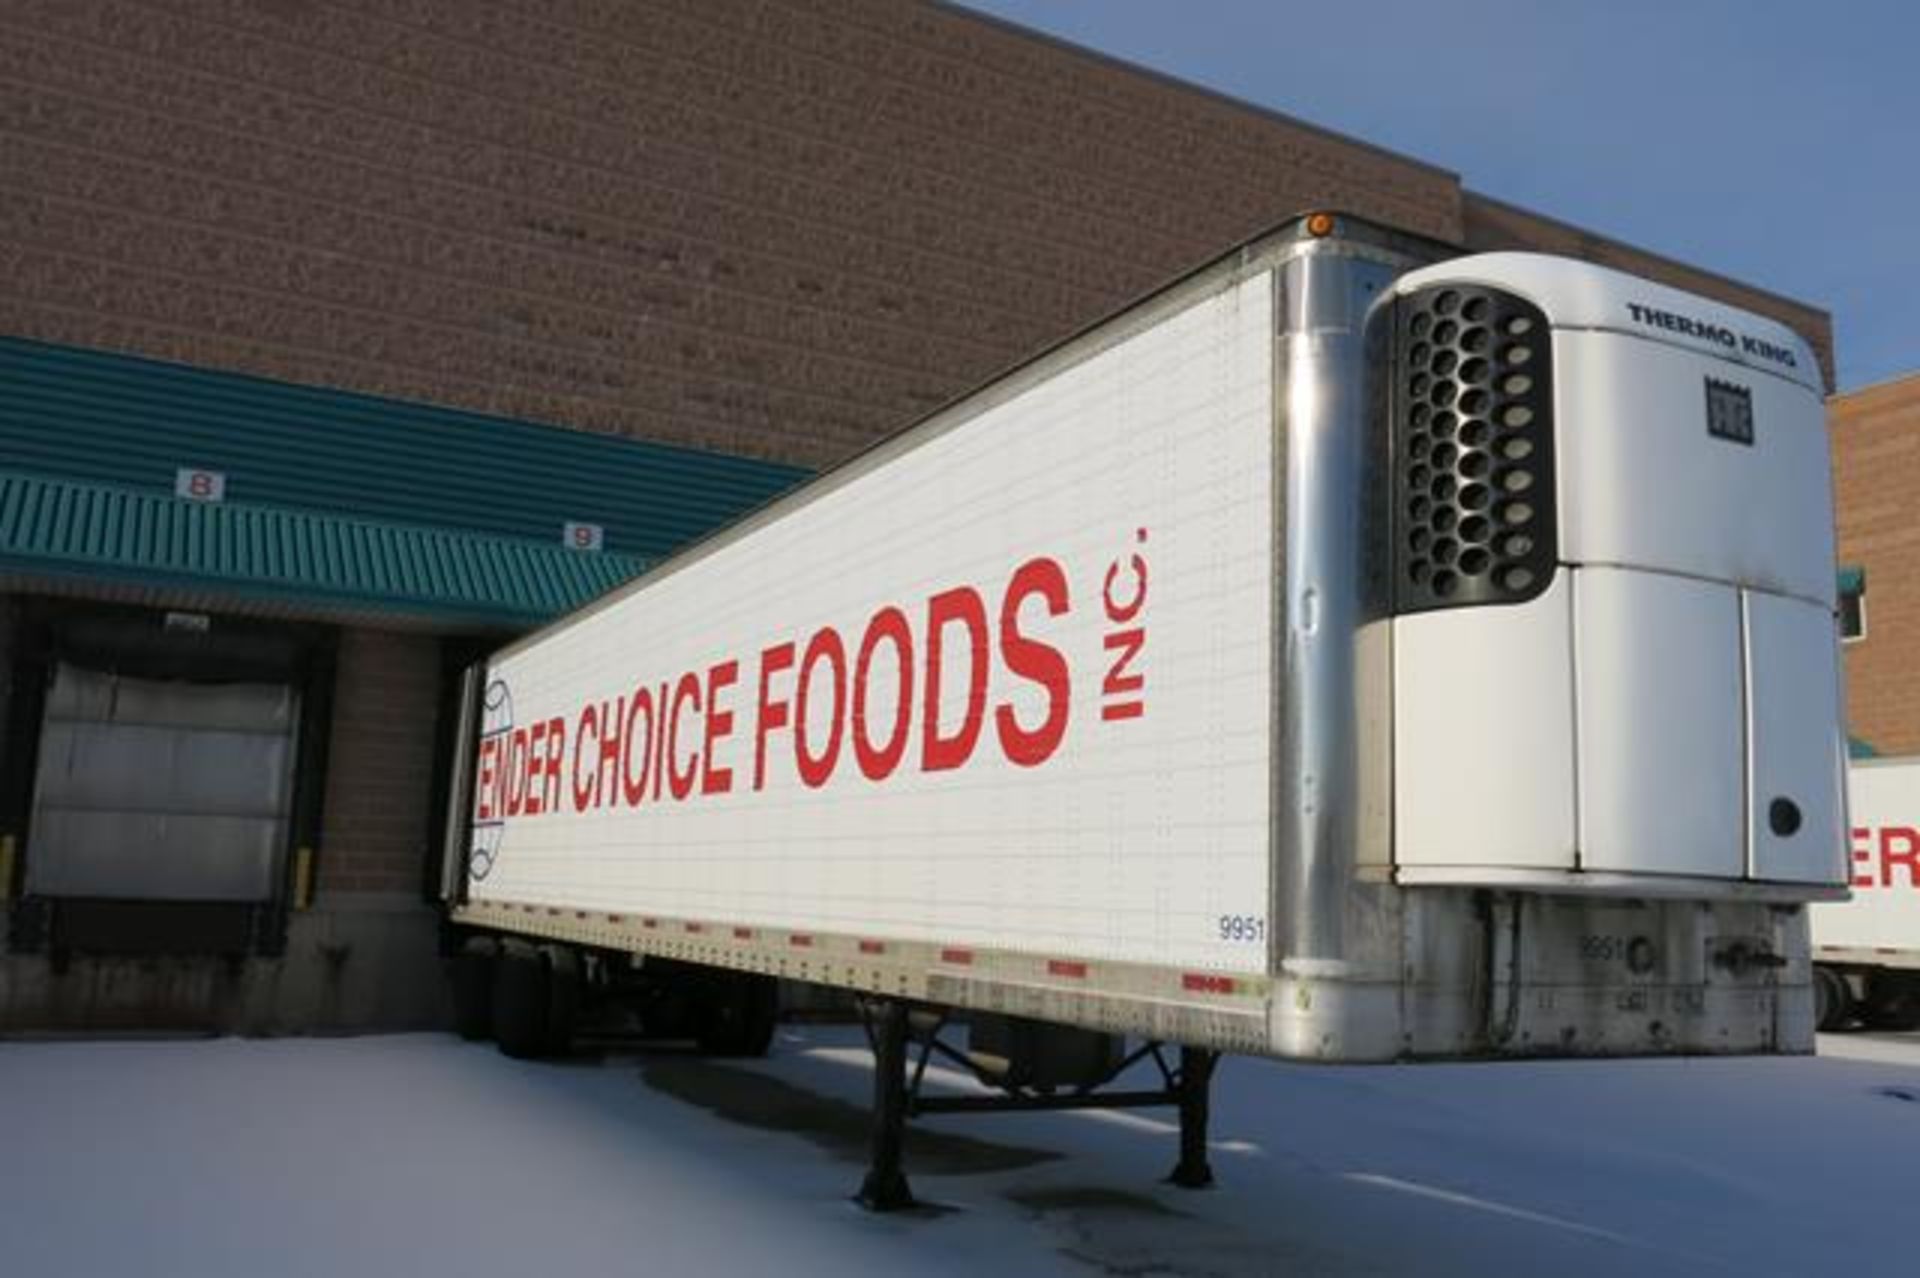 TRAILMOBILE, 53' REFRIGERATED VAN TRAILER, BARN DOORS, THERMO KING, SB-210, REEFER, 16,856 HOURS, - Image 2 of 11